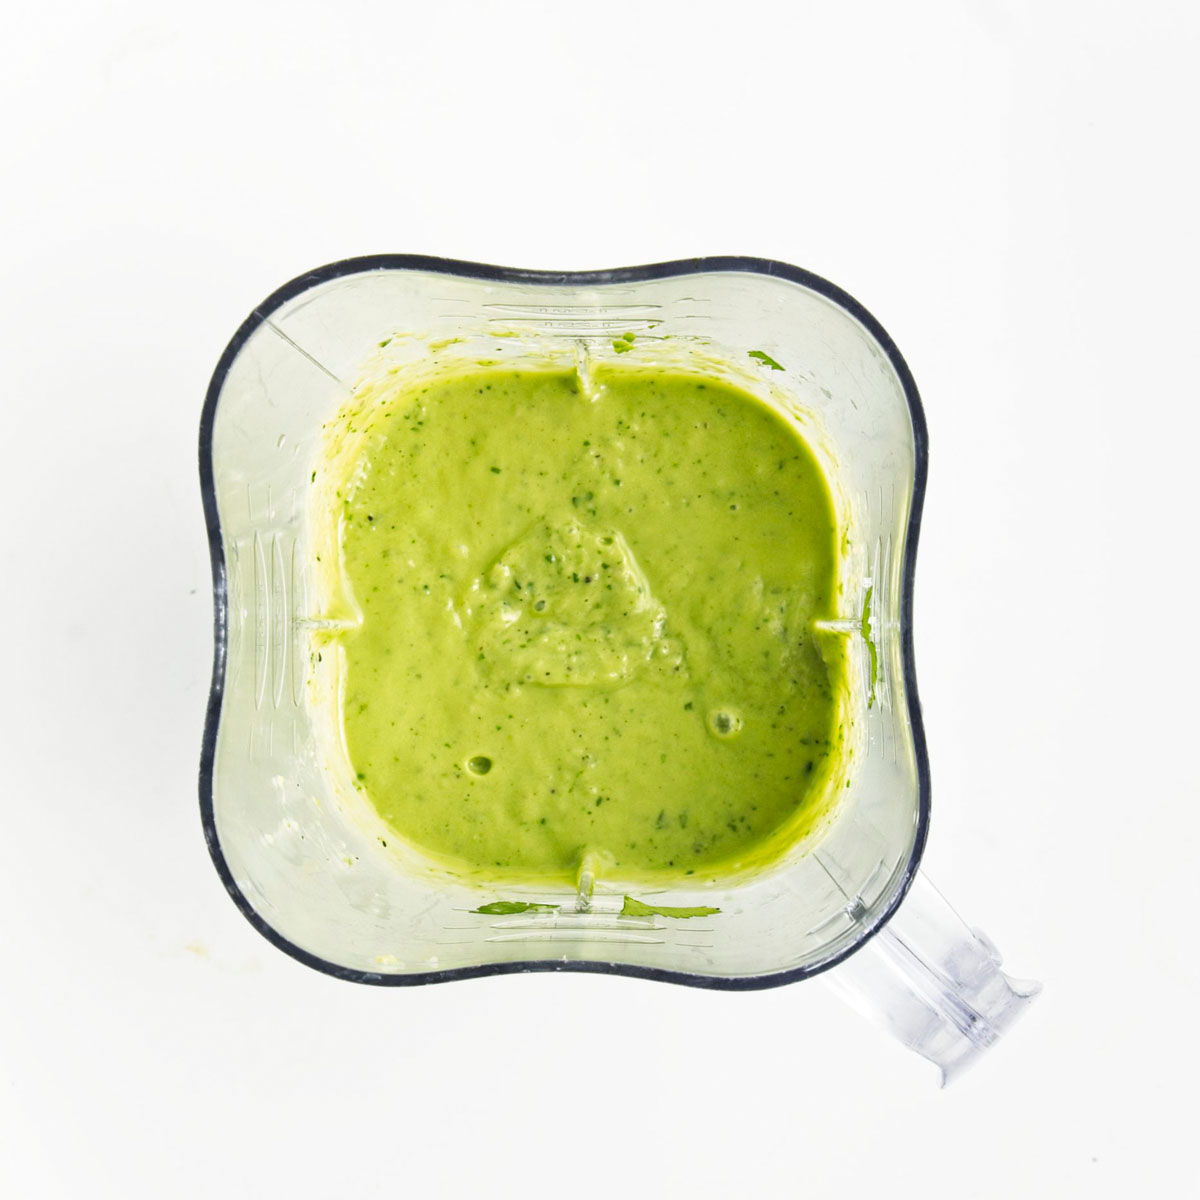 Blender with a vibrant green soup